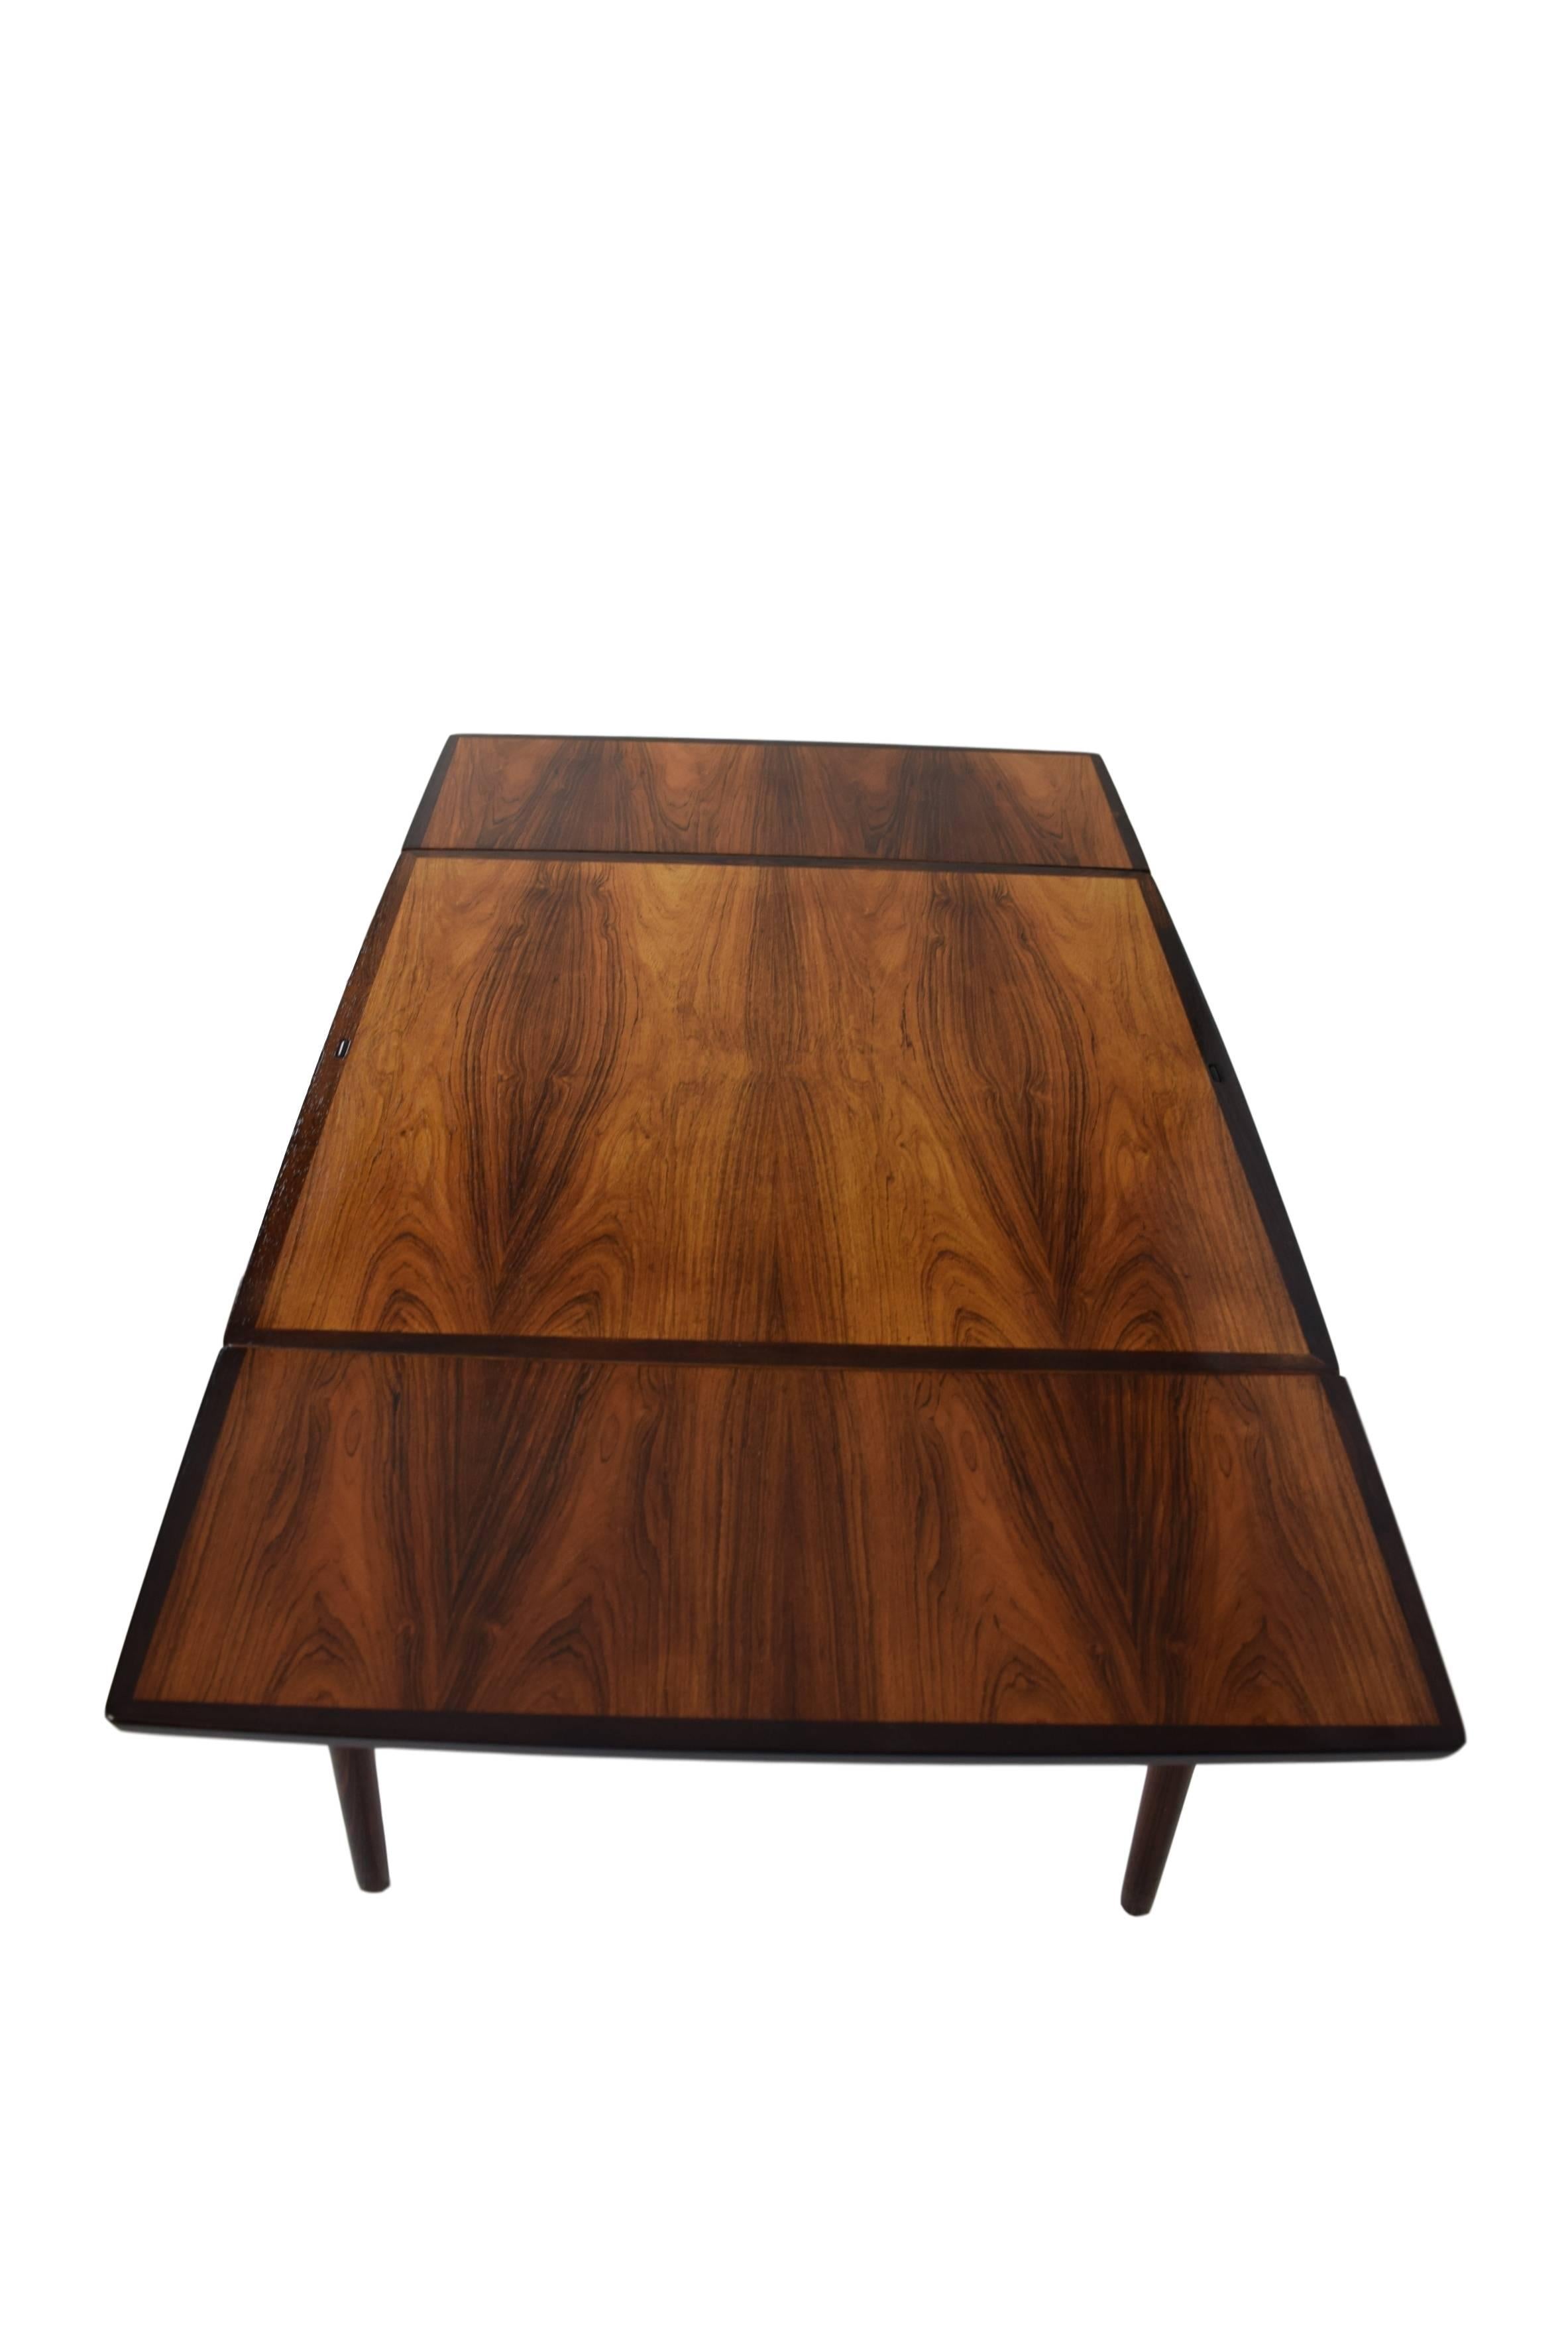 Mid-19th Century Danish Midcentury Games Table / Dining Table by Poul Hundevad, Reversible Top